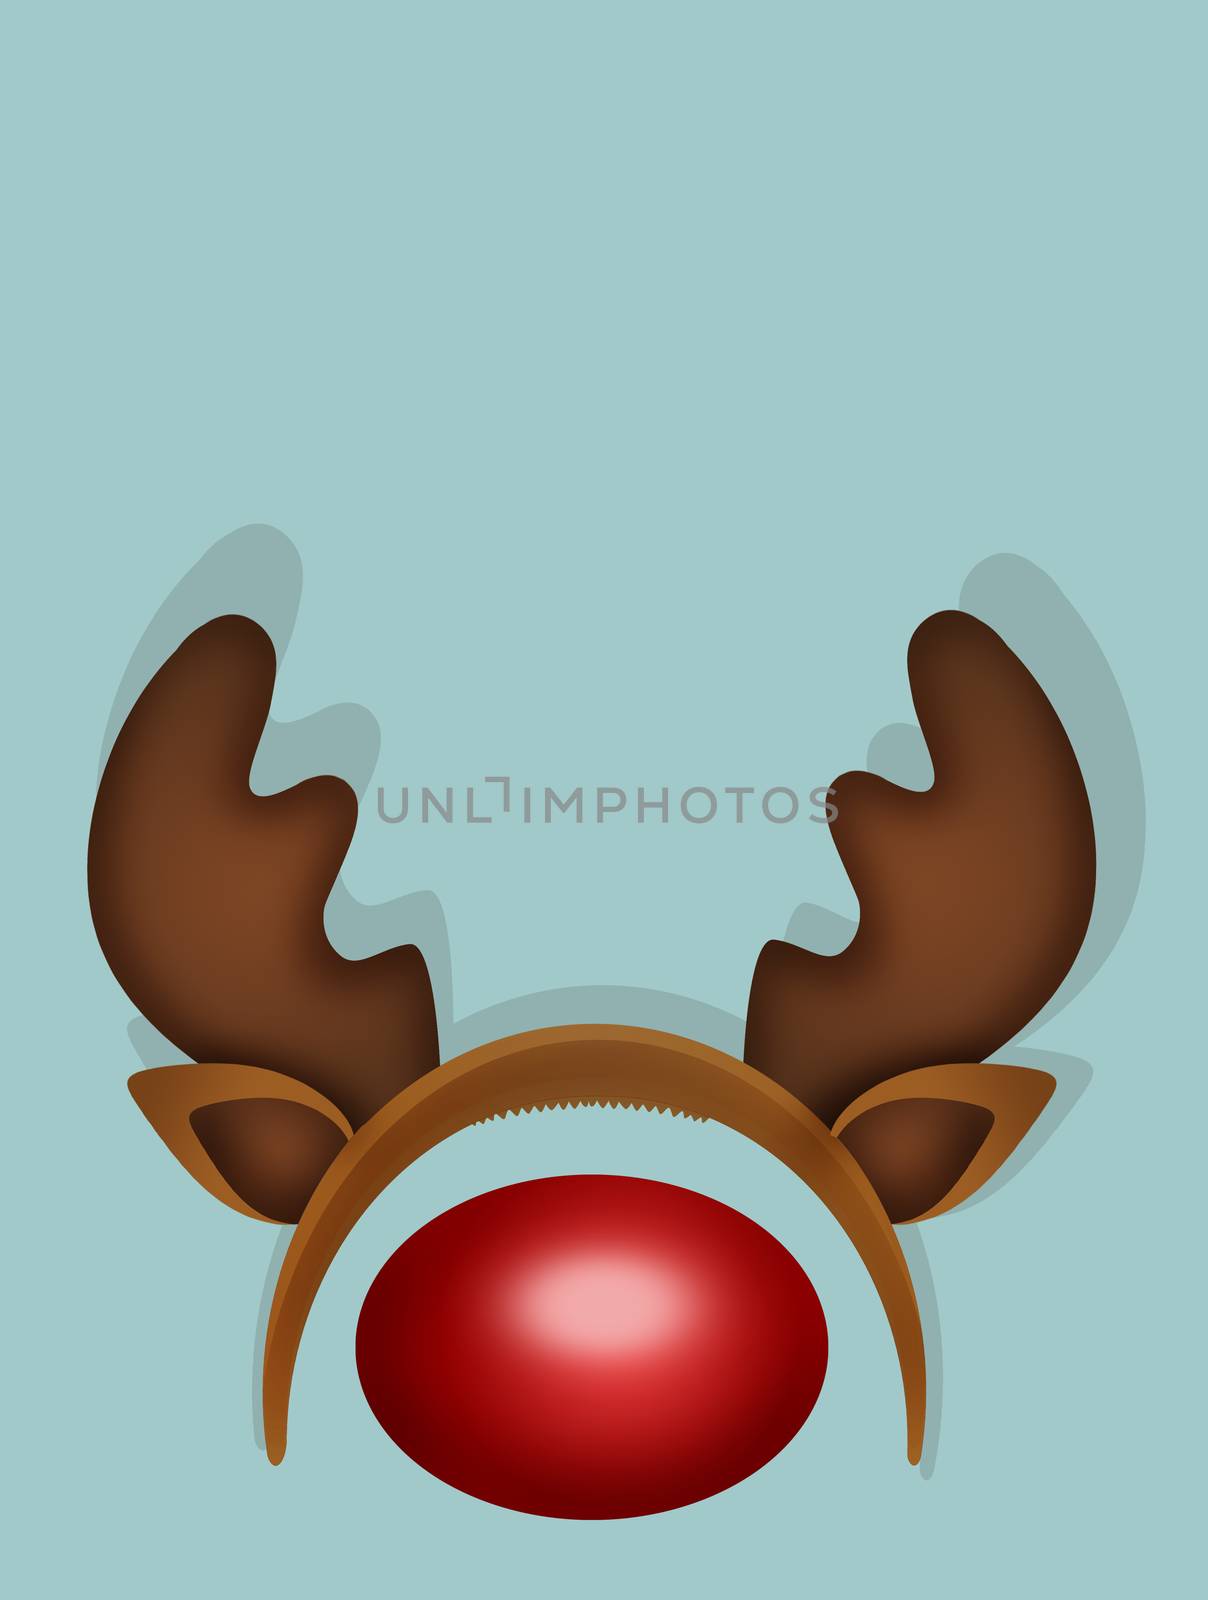 Reindeer horns and nose by adrenalina